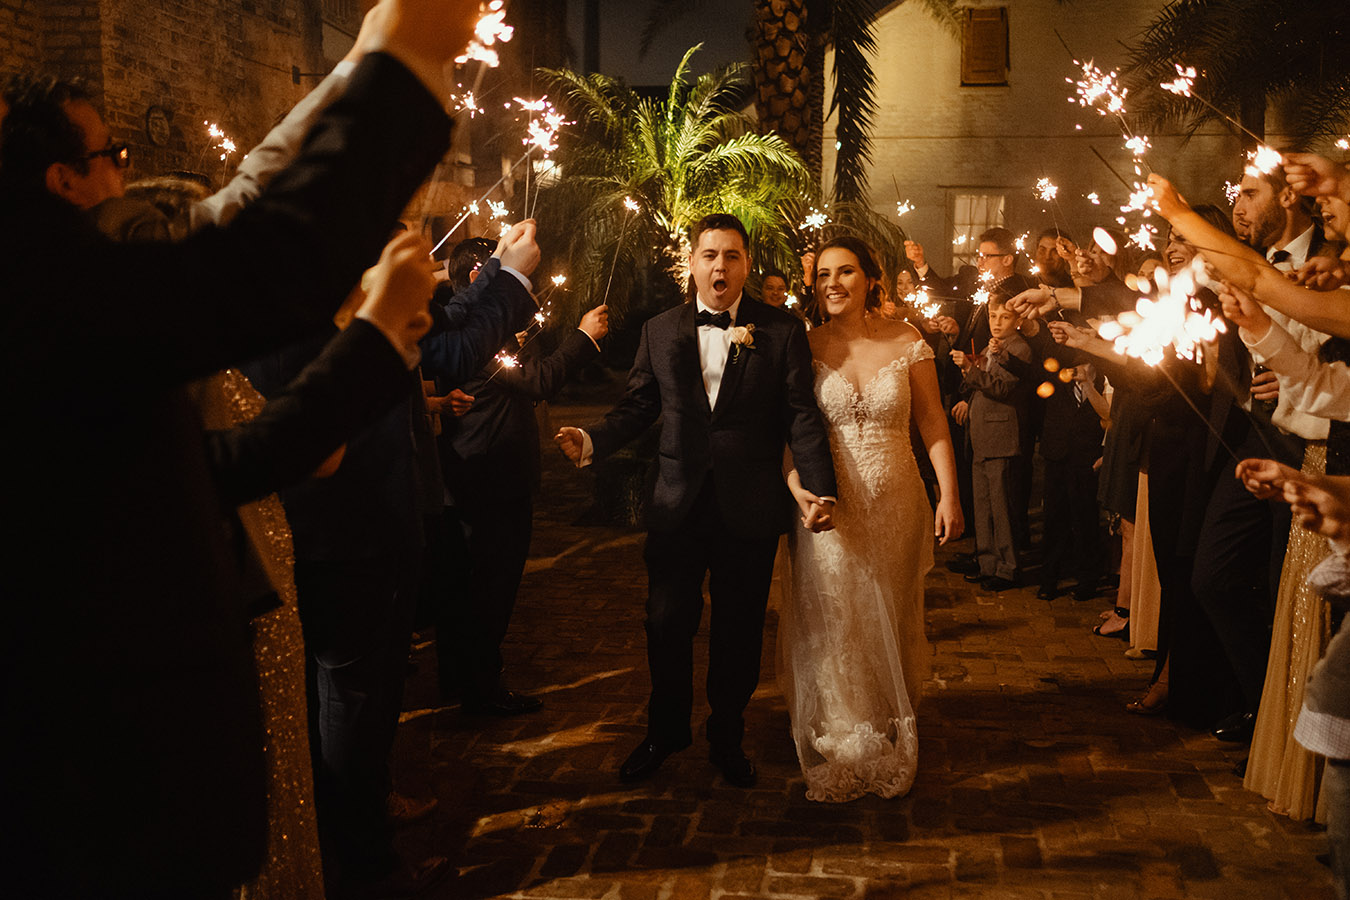 The evening ended with a sparkler send-off for the happy couple.